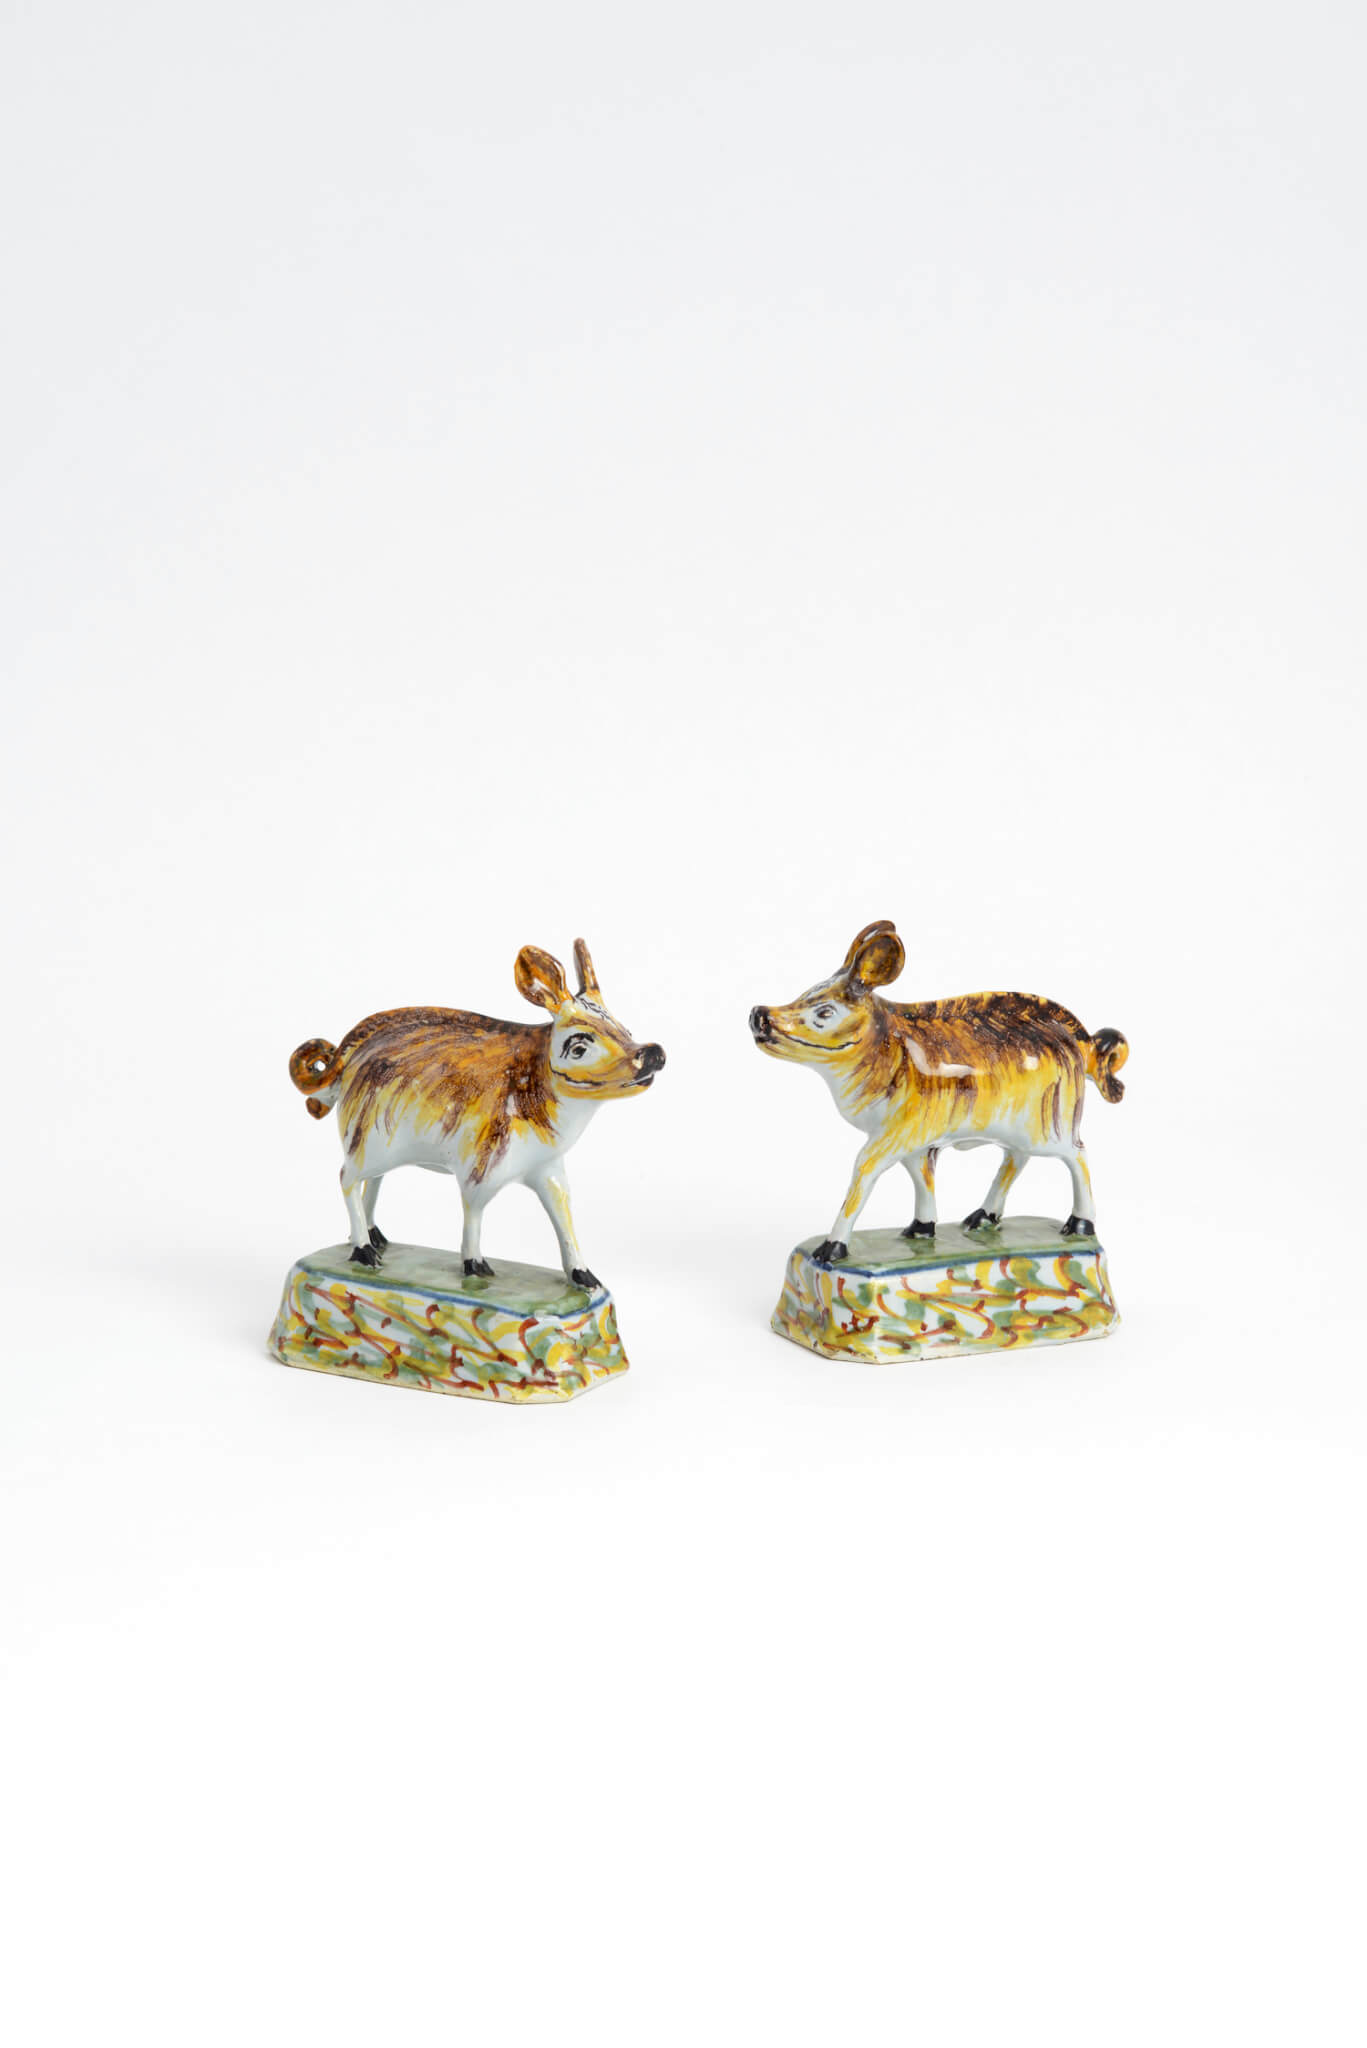 • D1851. Two Polychrome Figures of Small Wild Boars